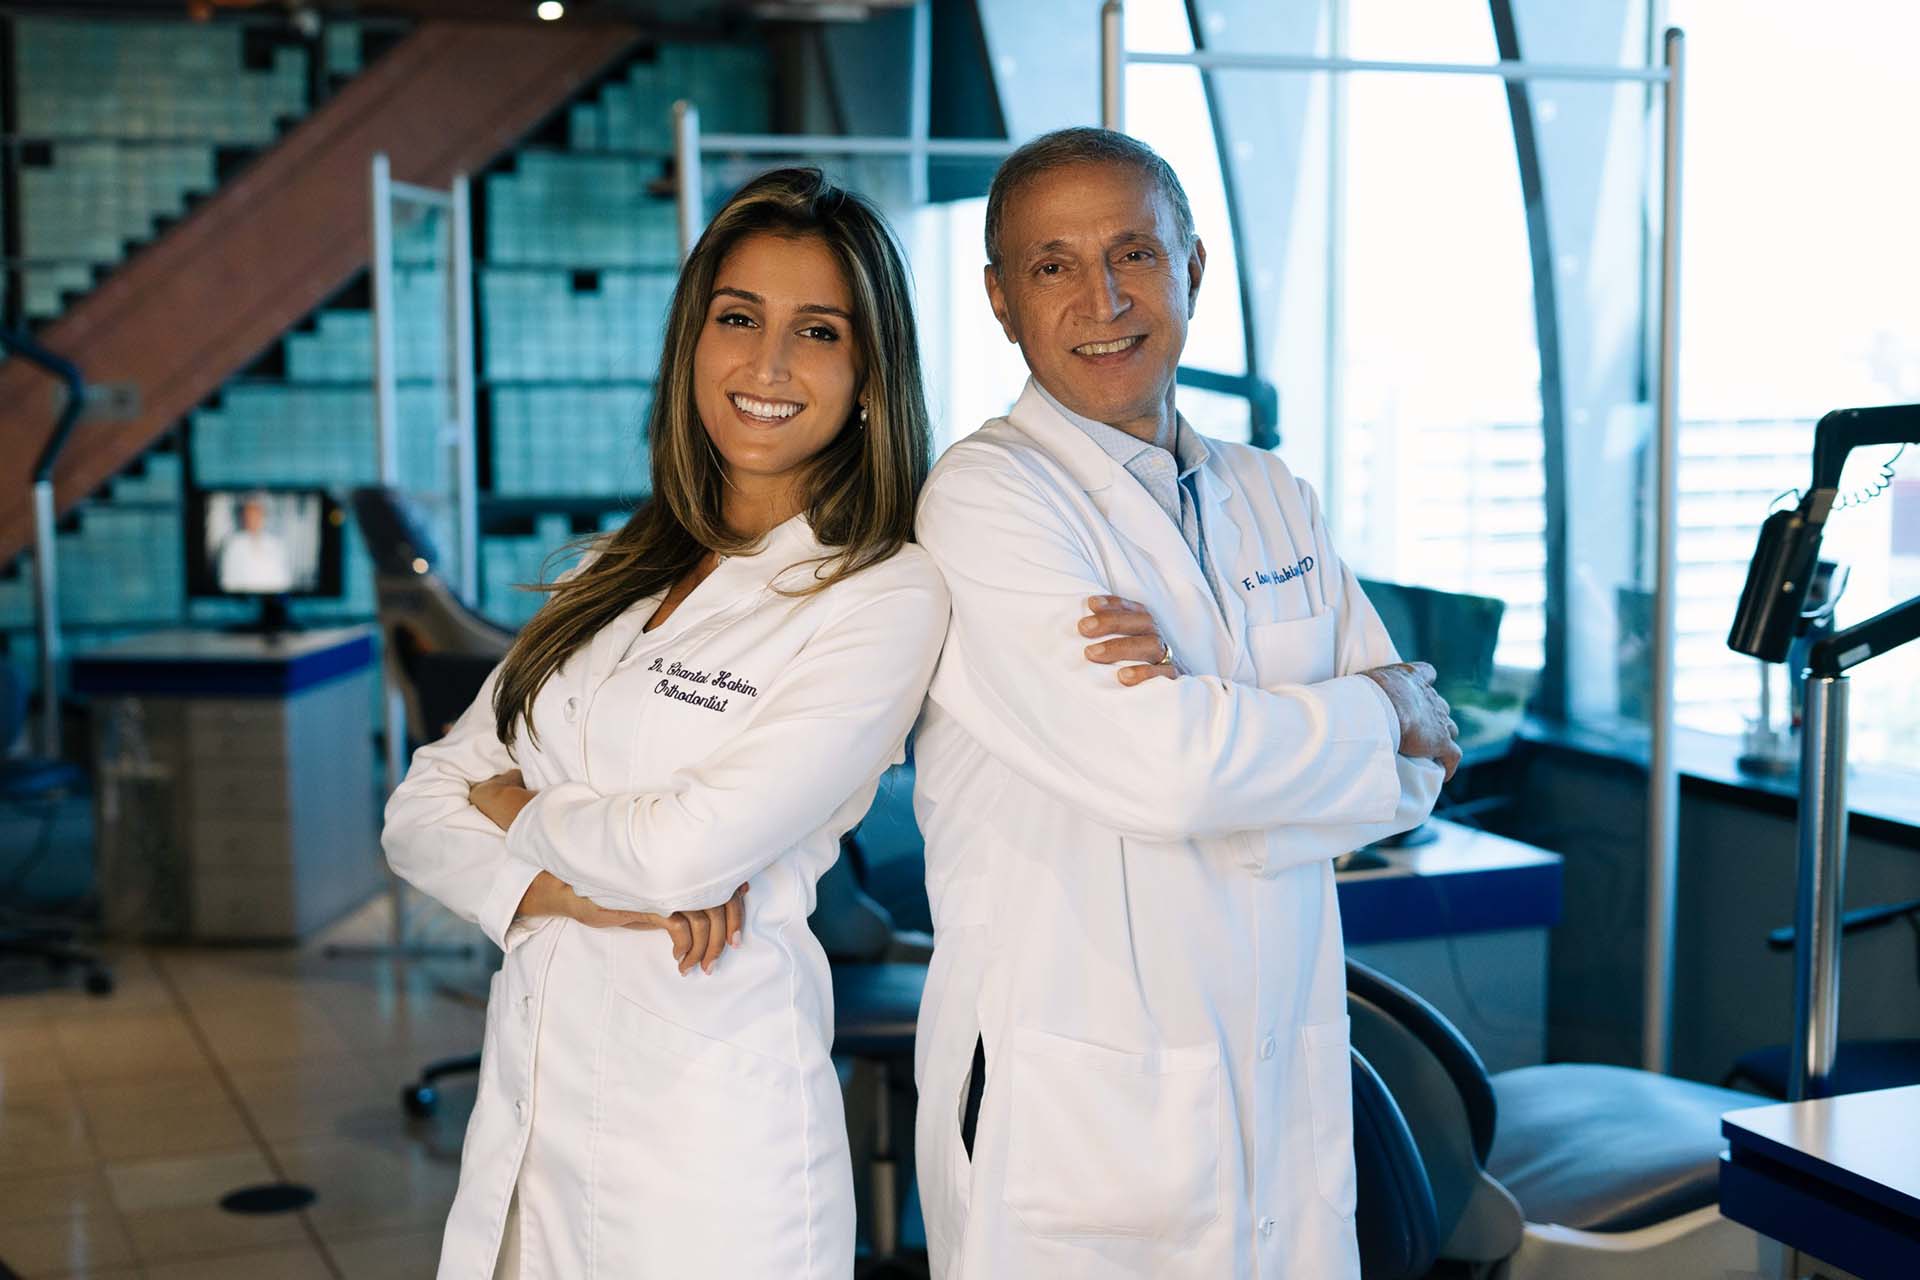 Dr. Chantal Hakim and Dr. F. Isaac Hakim at the Orthospaceship in Los Angeles, a Southern California orthodontic practice serving Santa Monica.